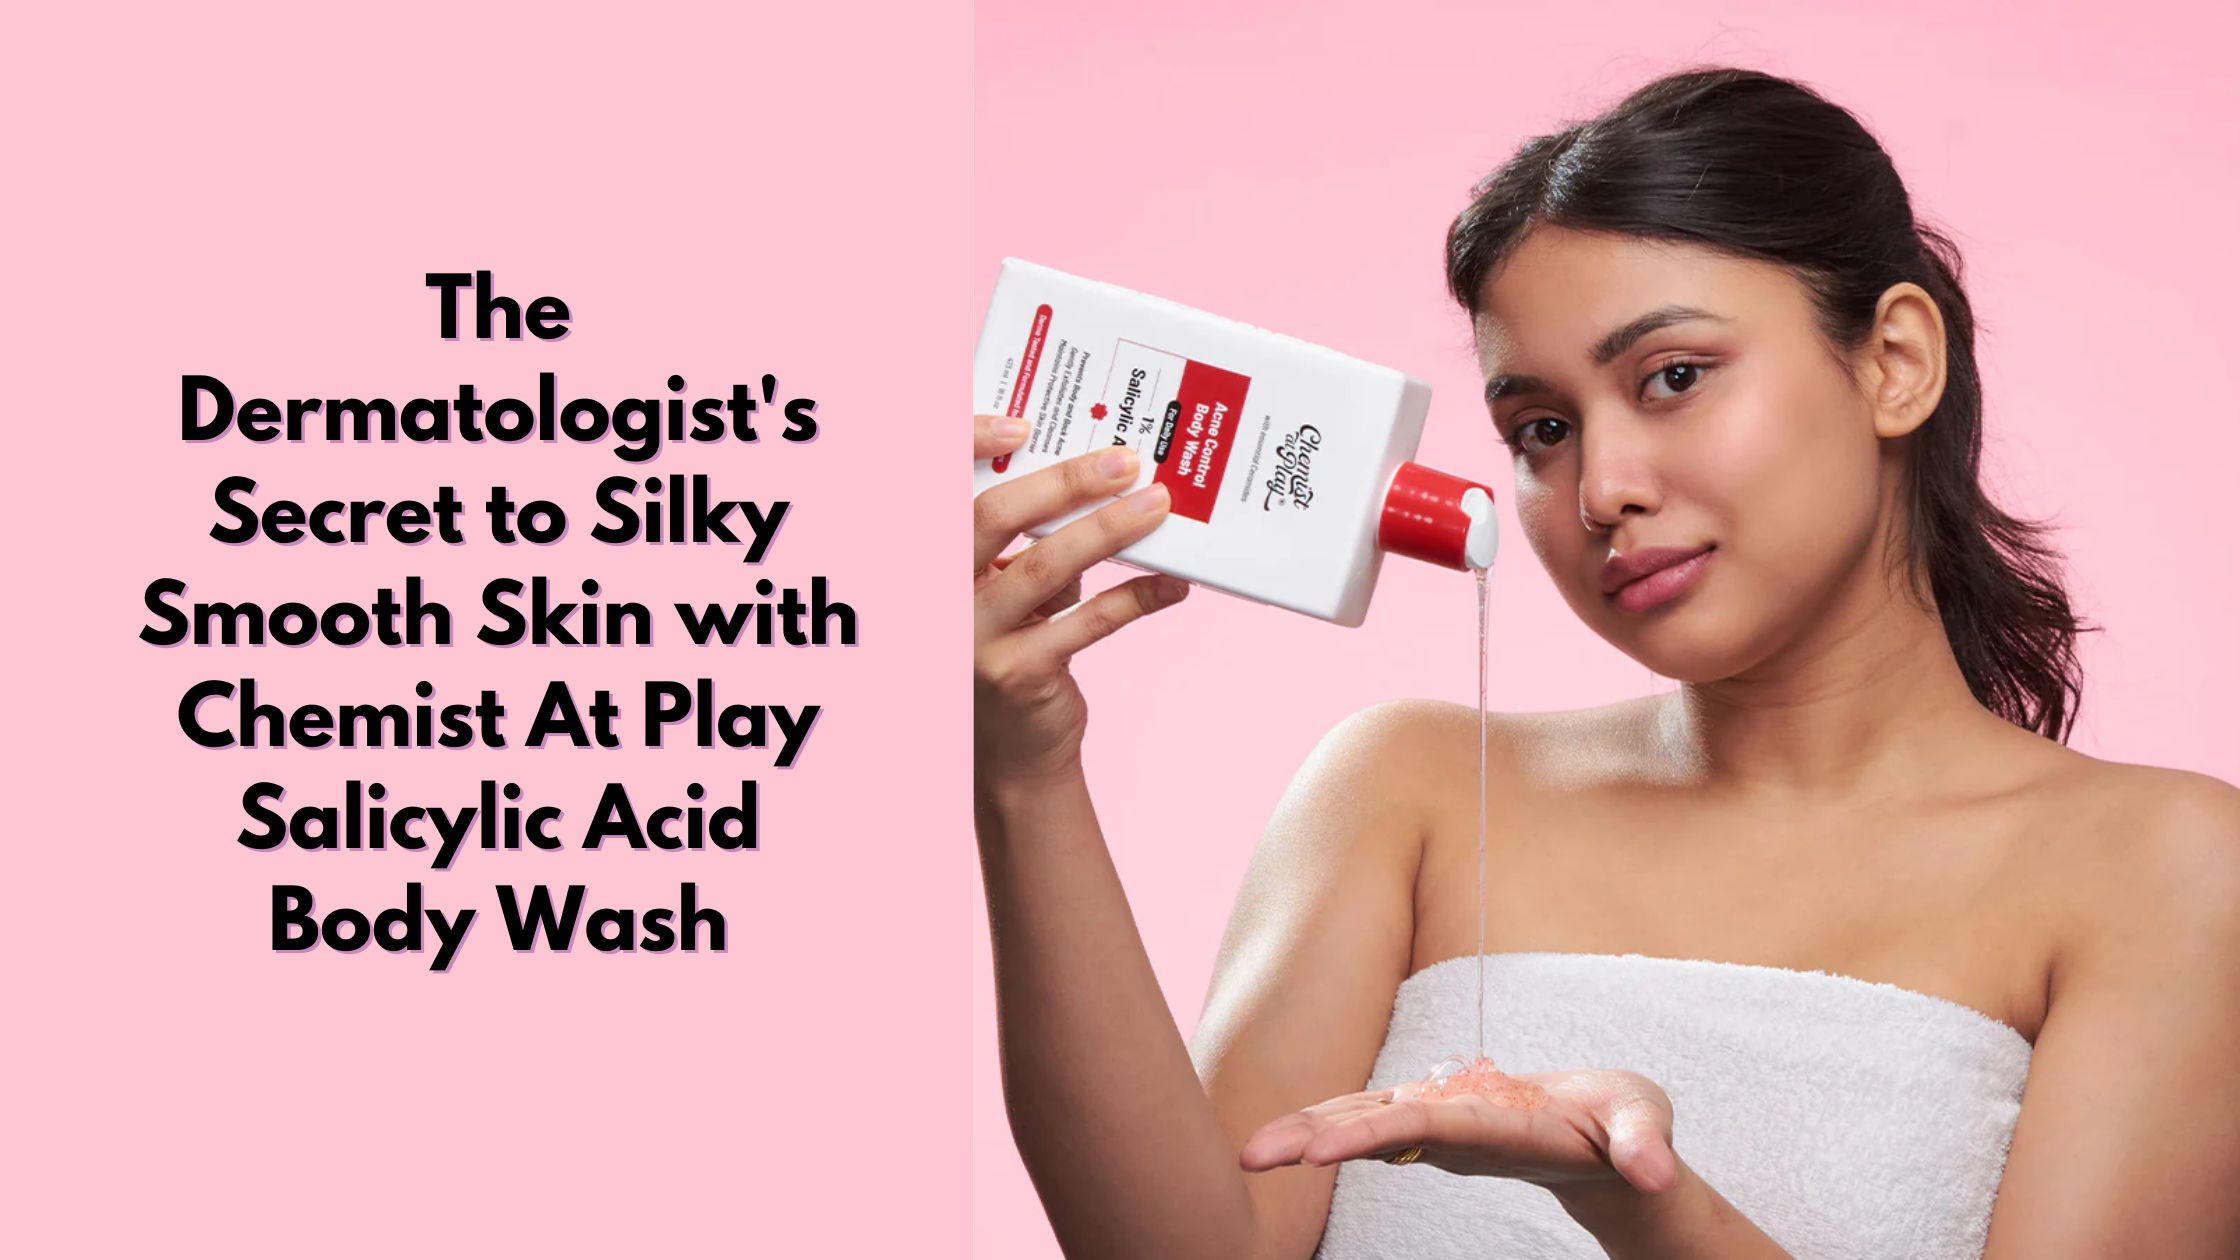 The Dermatologist's Secret to Silky Smooth Skin with Chemist At Play Salicylic Acid Body Wash